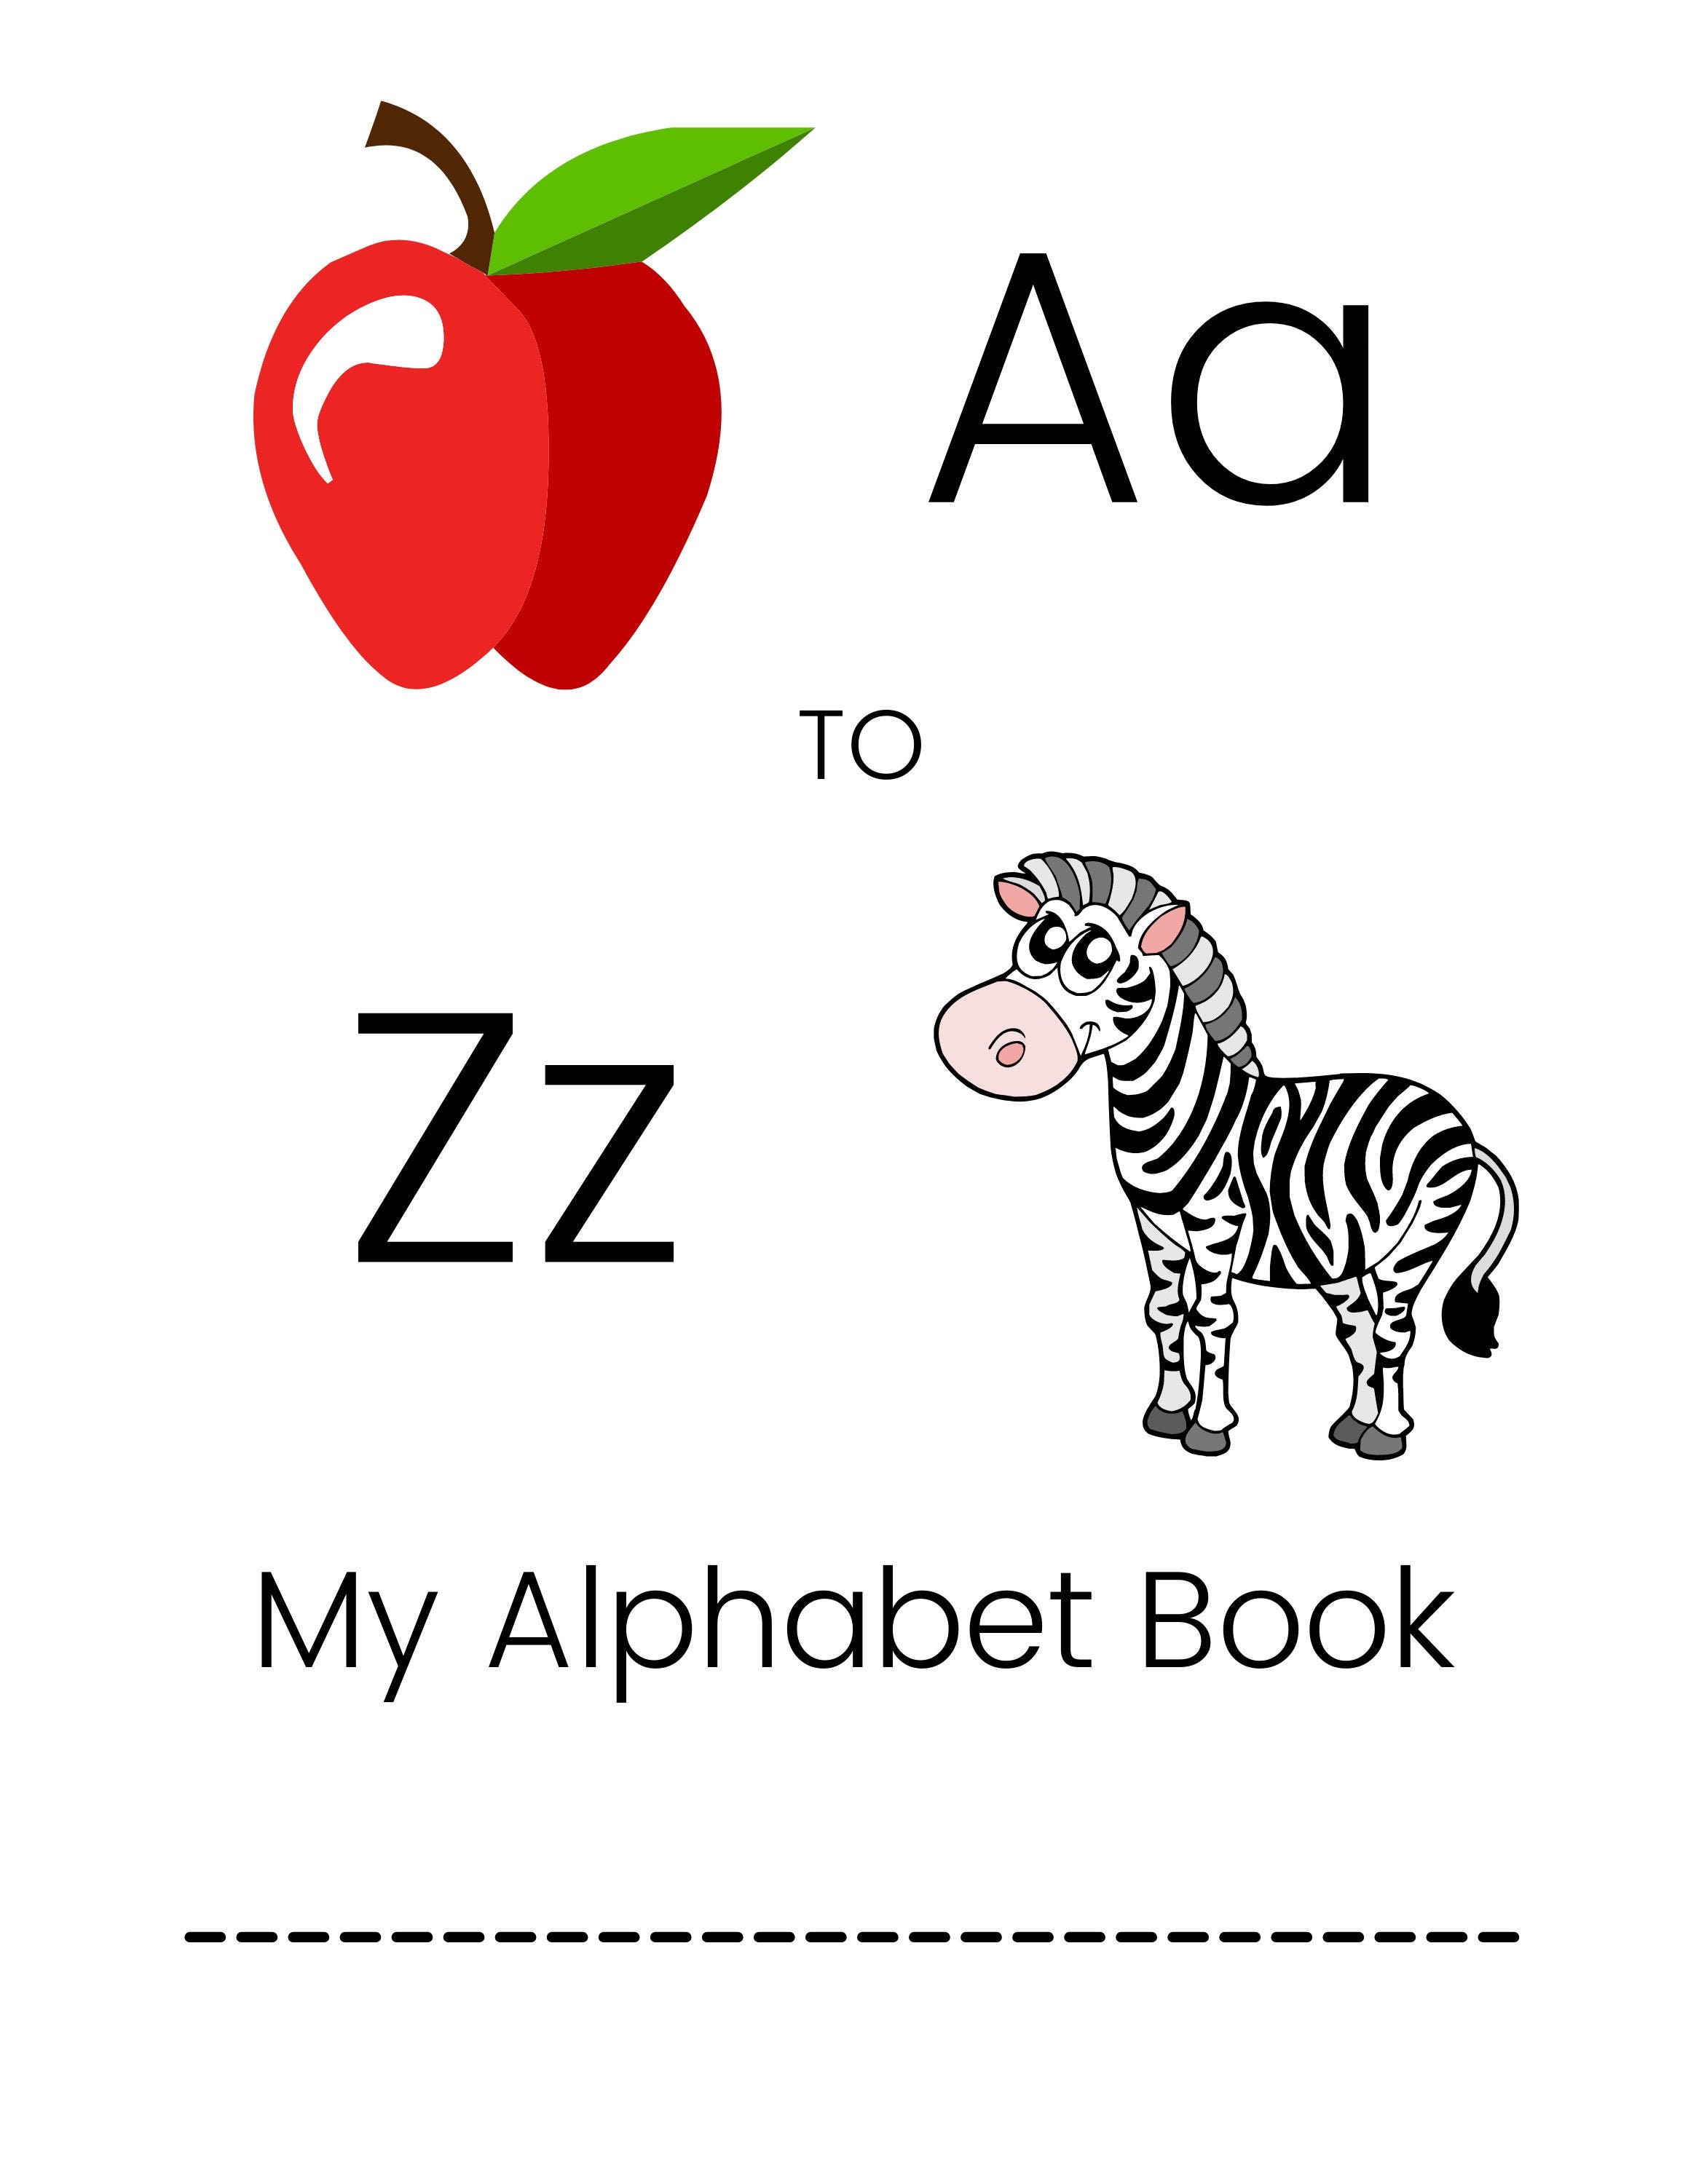 4-best-images-of-printable-abc-book-template-free-alphabet-book-cover